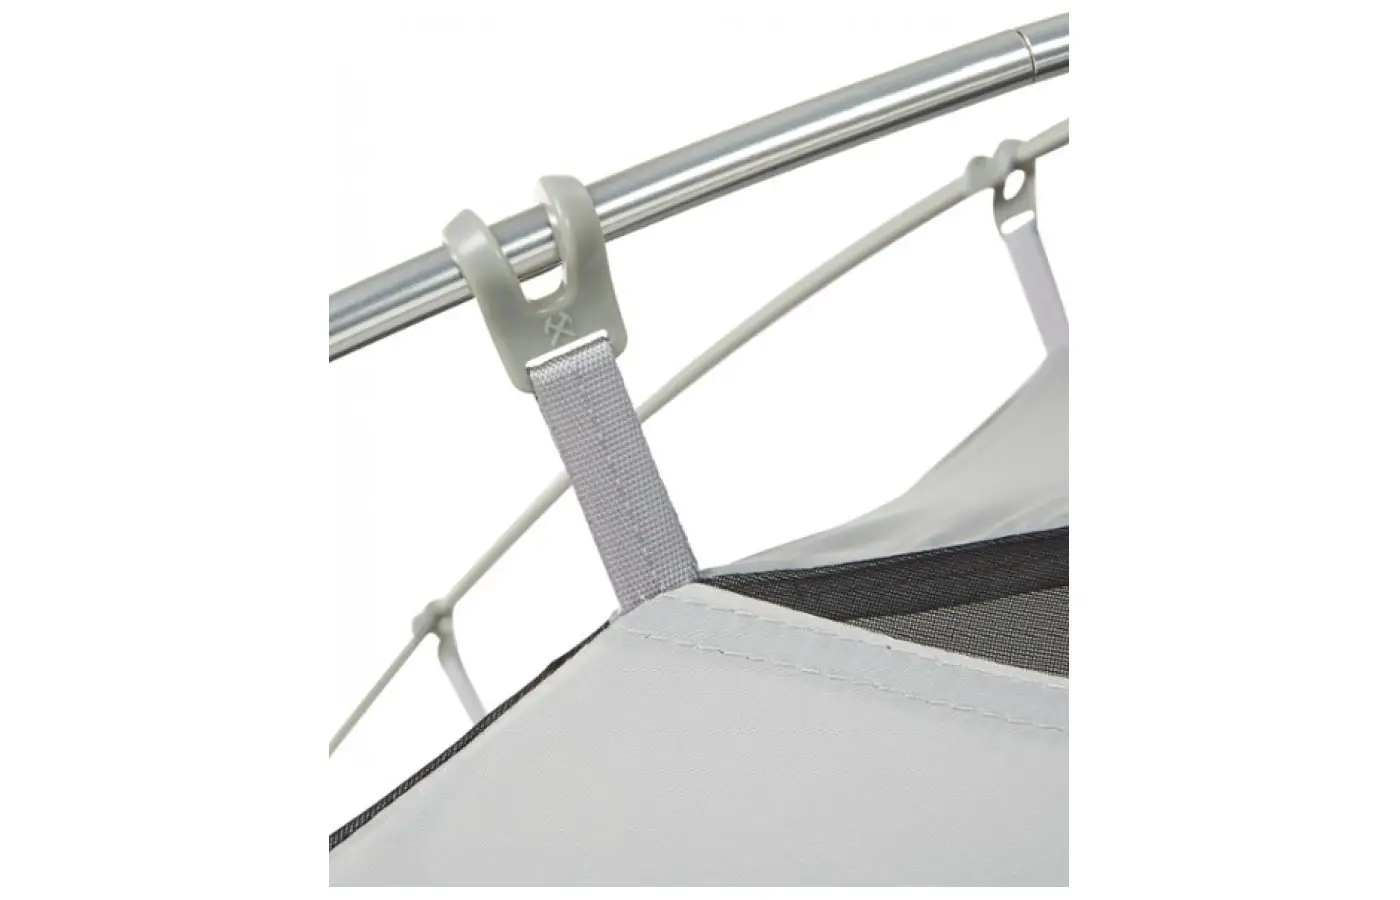 Clips are used to attach the tent to the poles. 